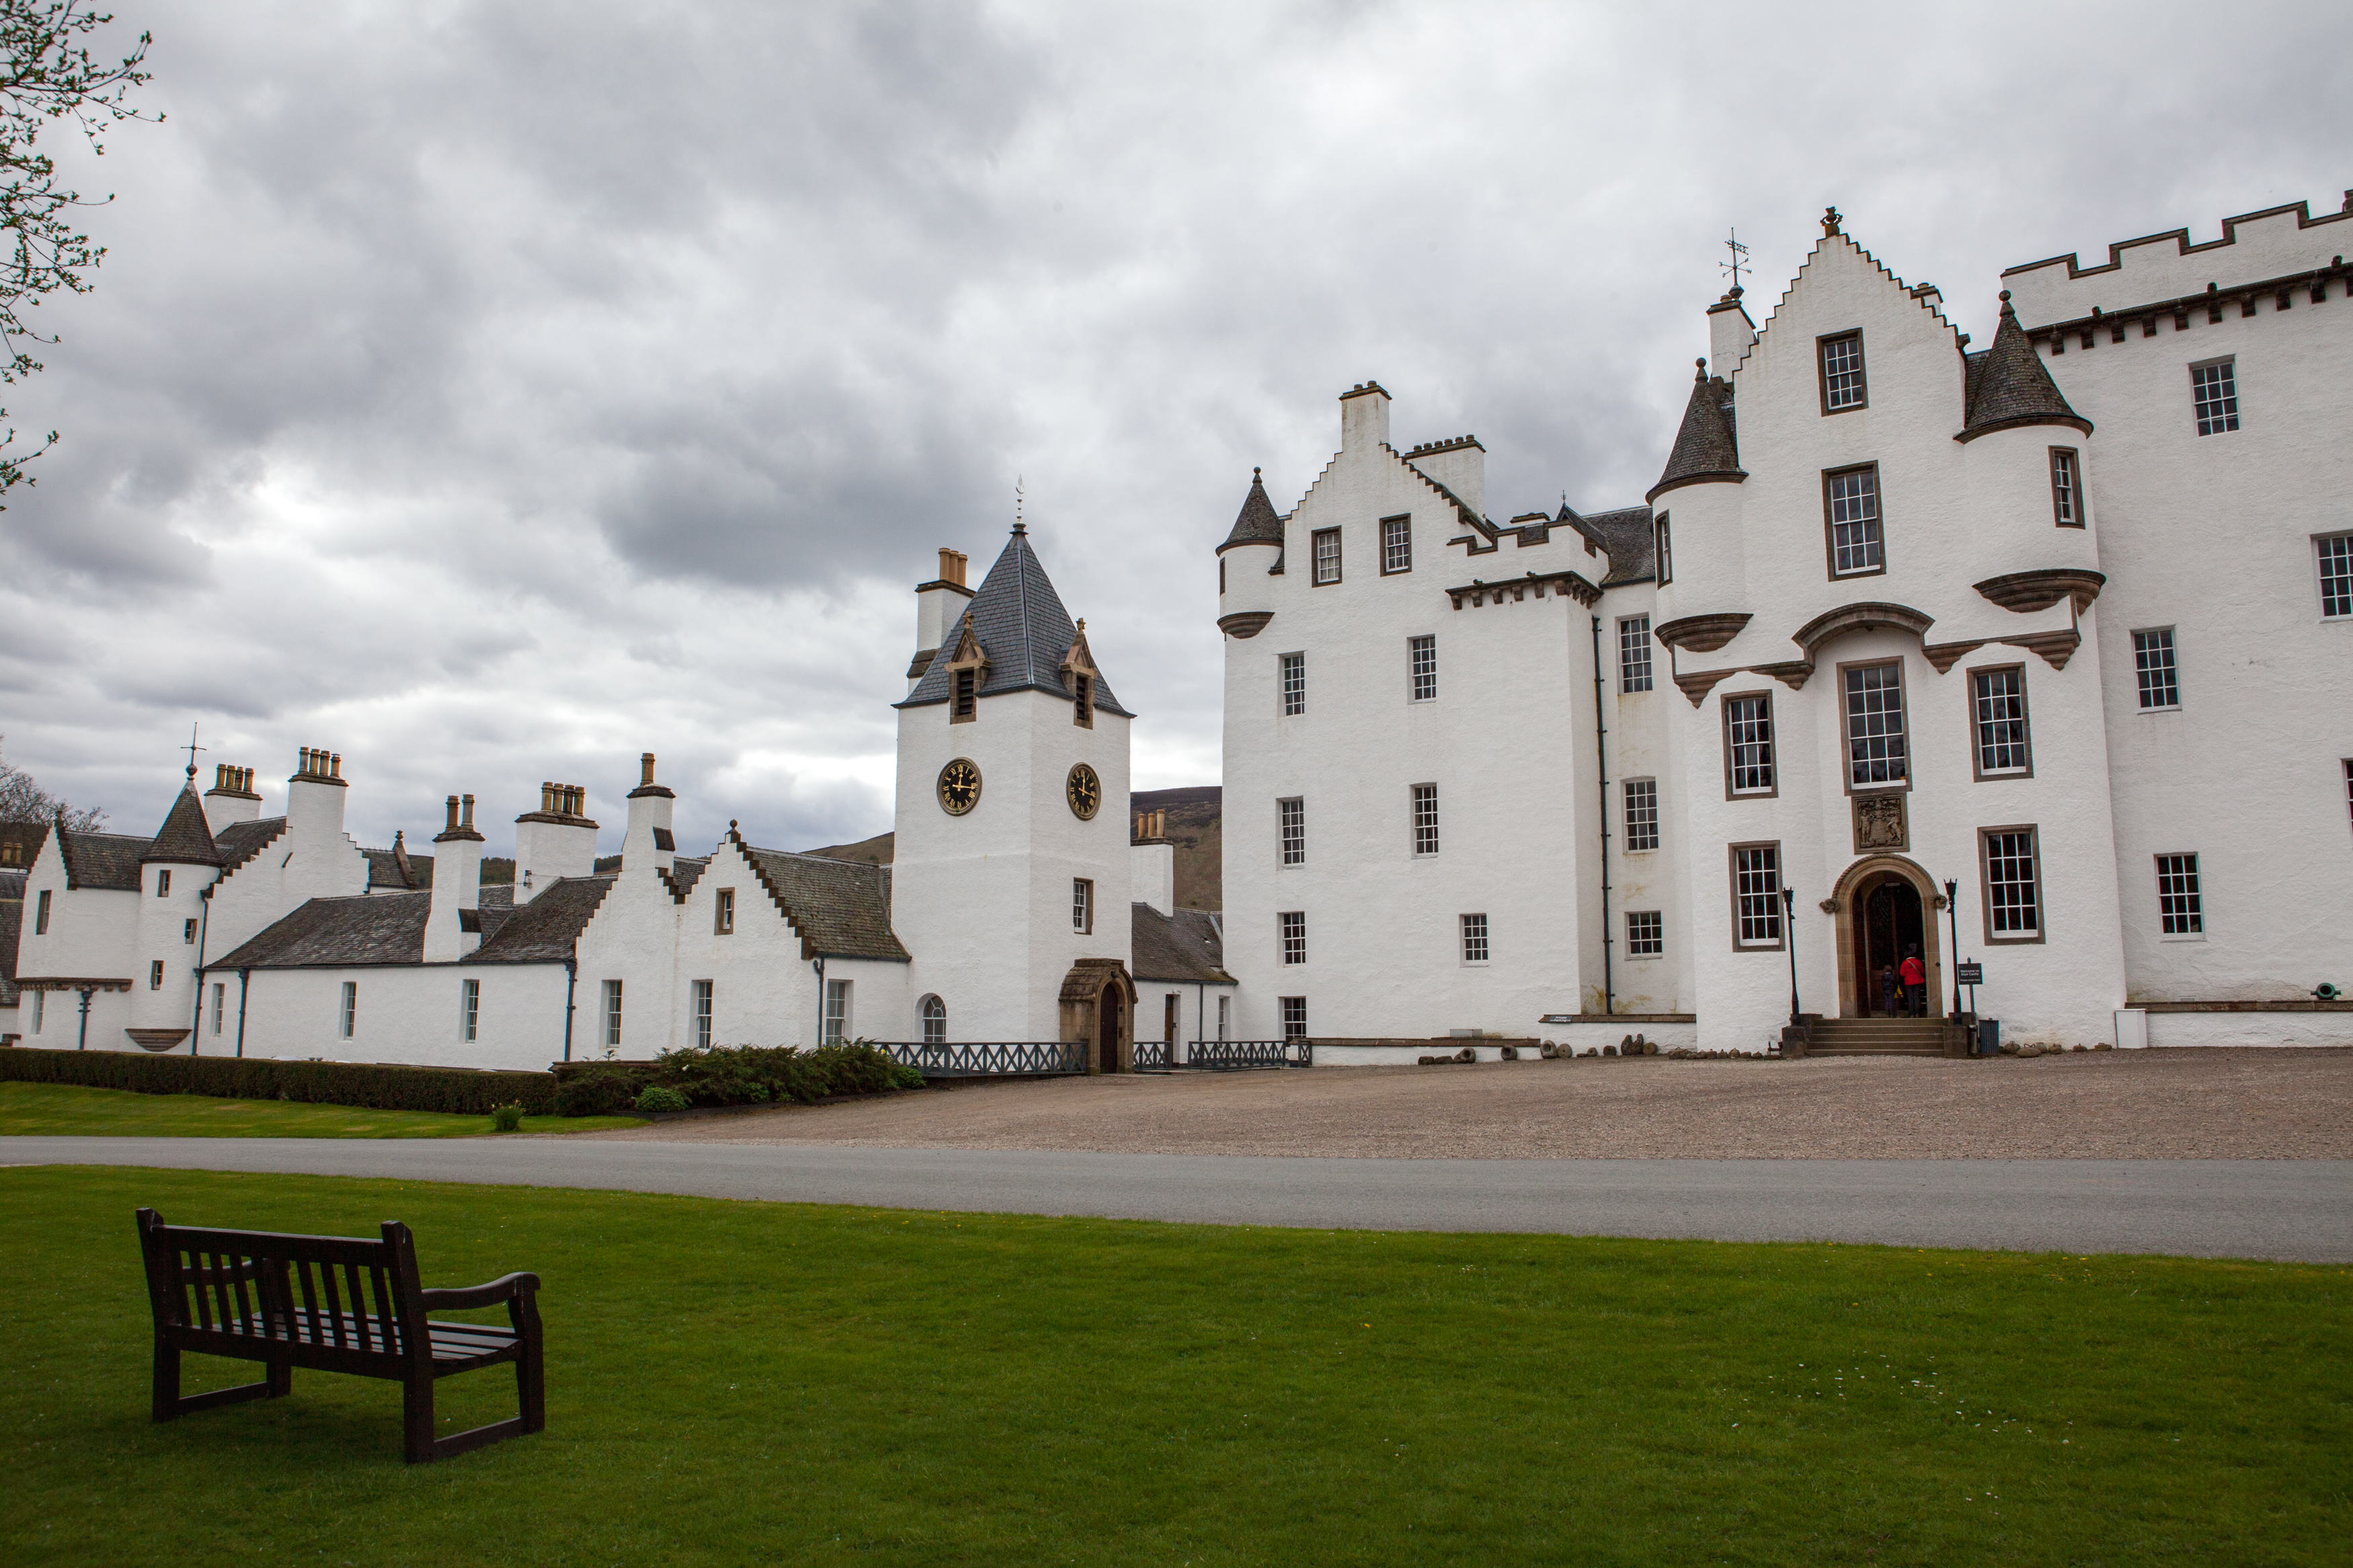 Photo of the front of a white Scottish castle, with a bench on a grassy area in front.